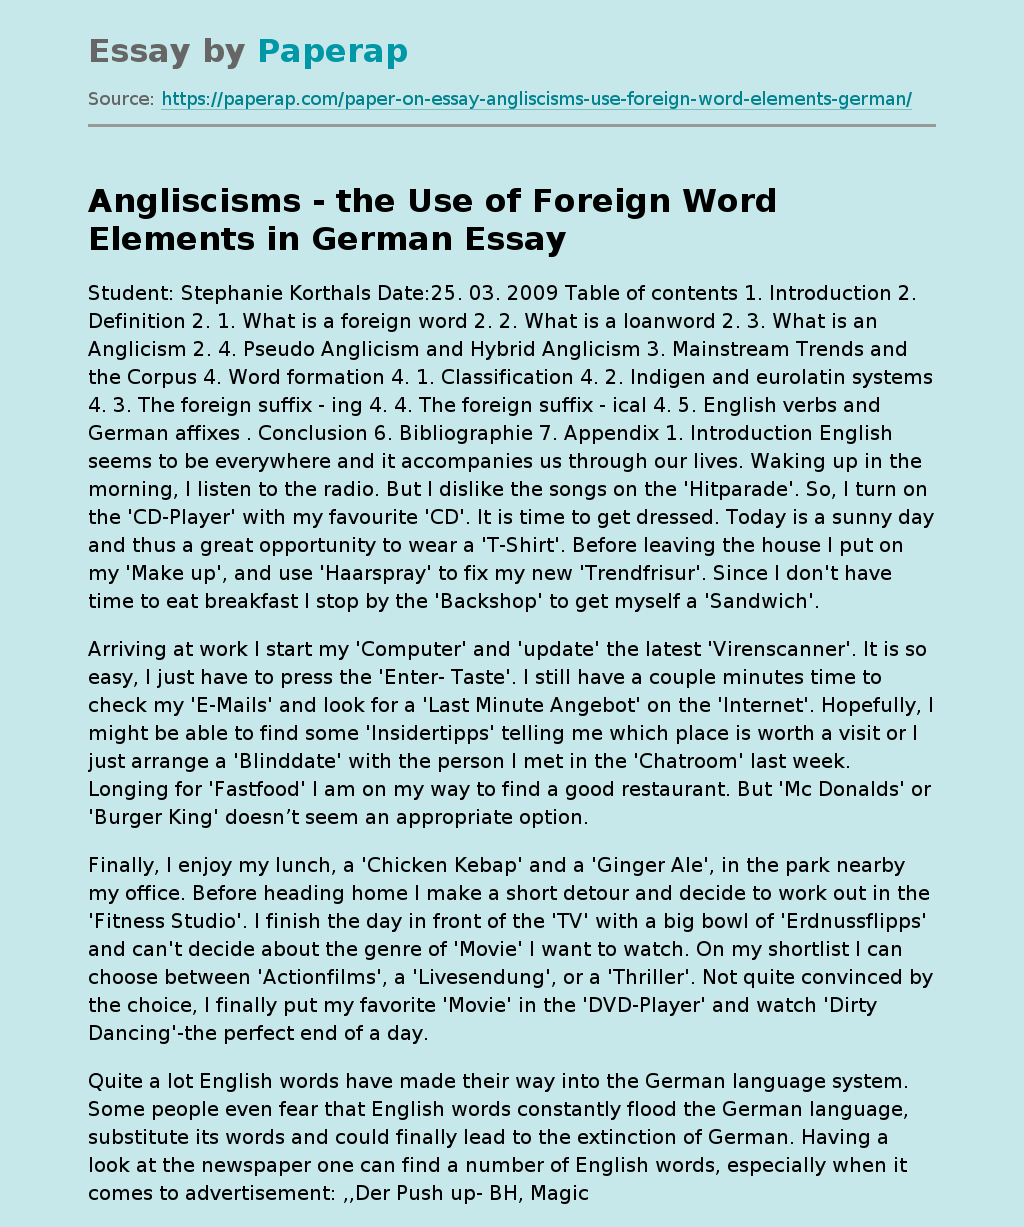 Angliscisms - the Use of Foreign Word Elements in German